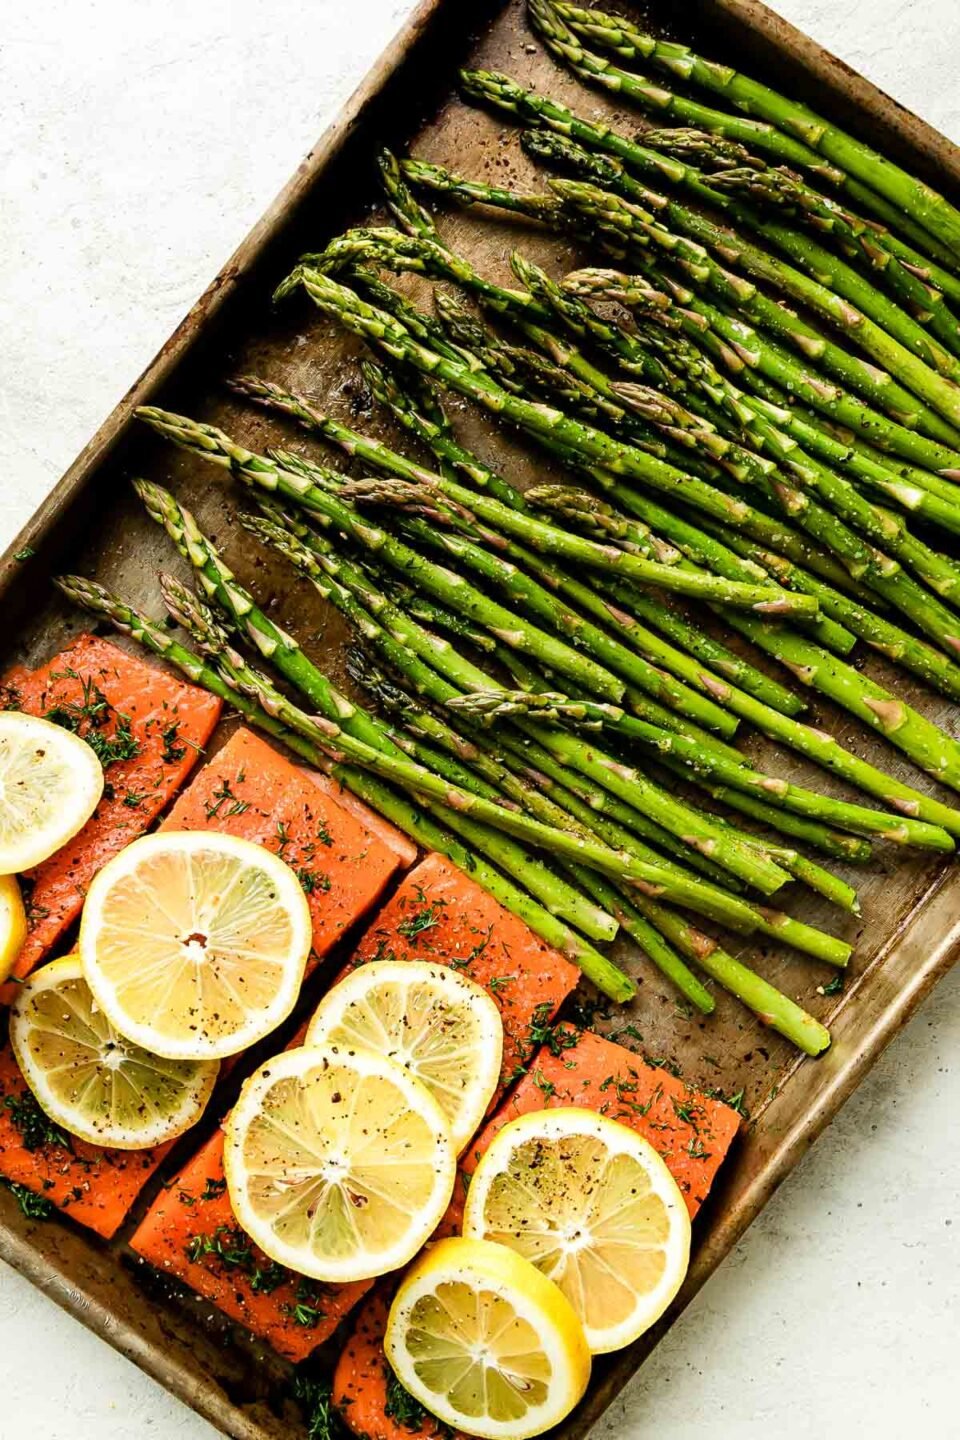 Four seasoned salmon fillets are arranged on a small metal sheet pan topped with lemon. Seasoned asparagus spears are arranged parallel to the fillet and the baking sheet sits atop a creamy white surface.